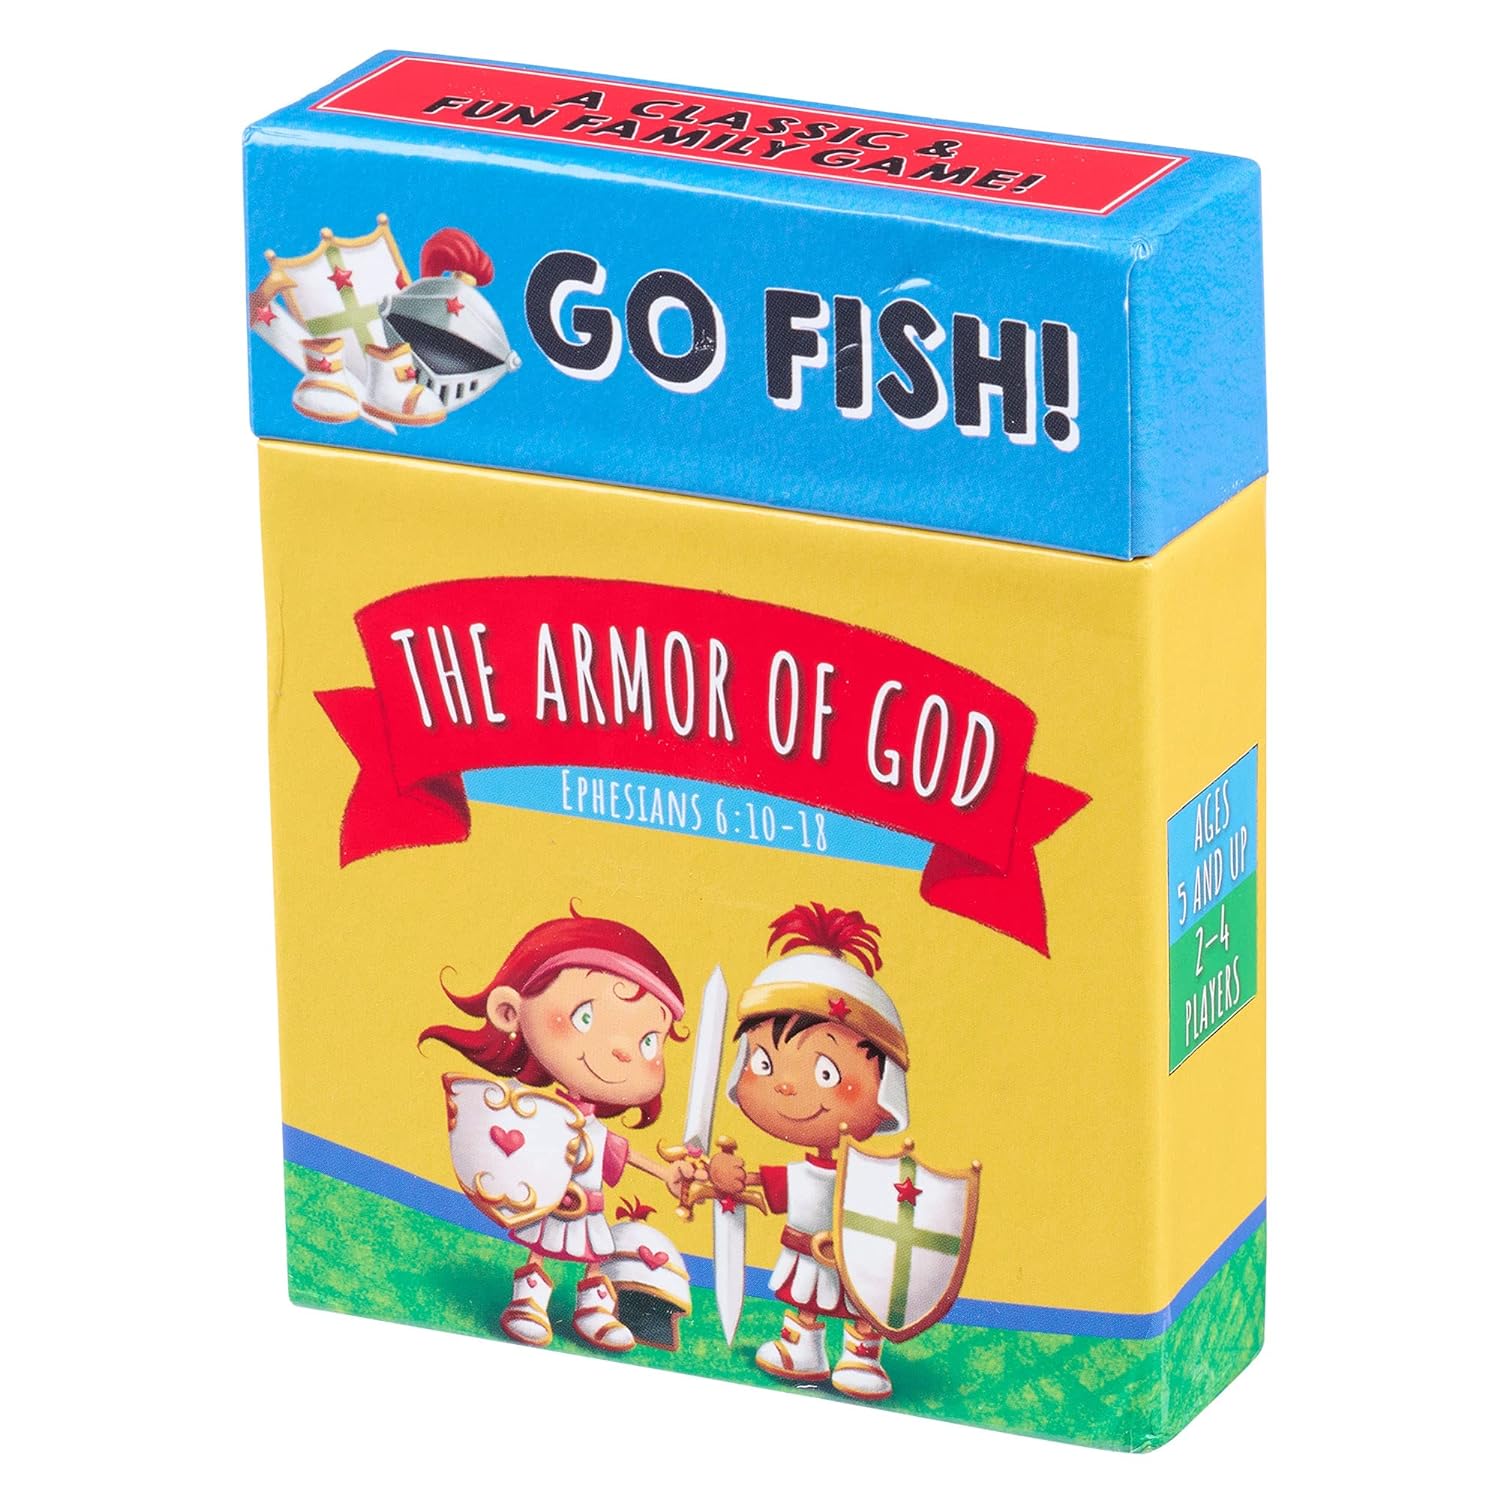 Go Fish! The Armor of God Card Game, 48 Double-Sided Cards, Ages 5-8 Christian Game claimedbygoddesigns